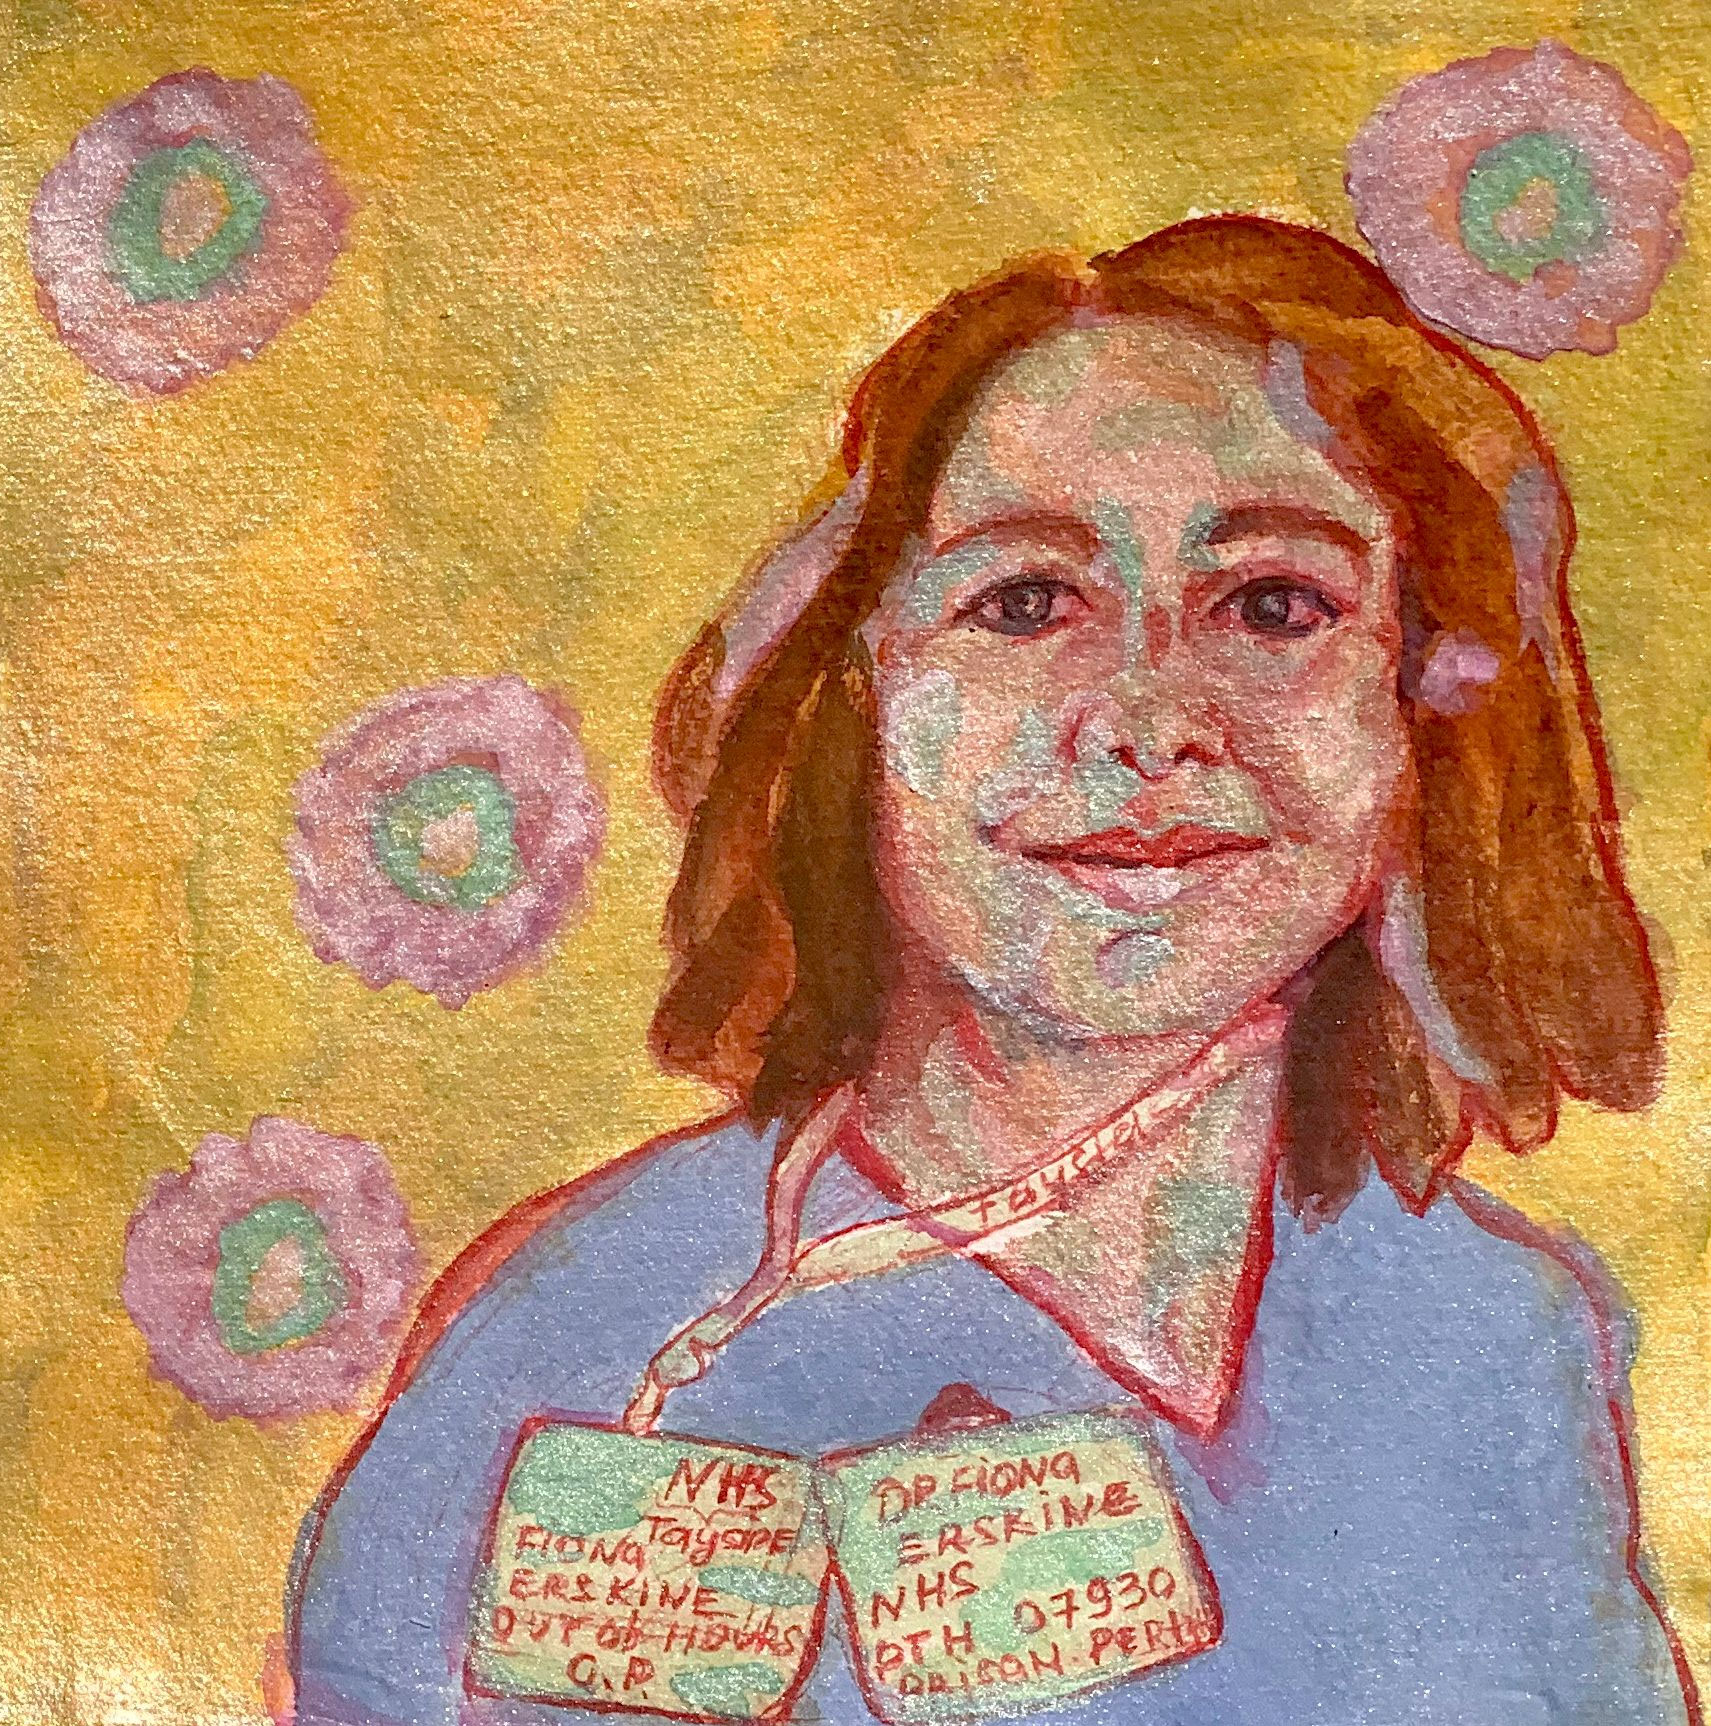 Dr. Fiona Erskine, 2, 2020, 8.5″ by 8.5″, watercolor on rag paper